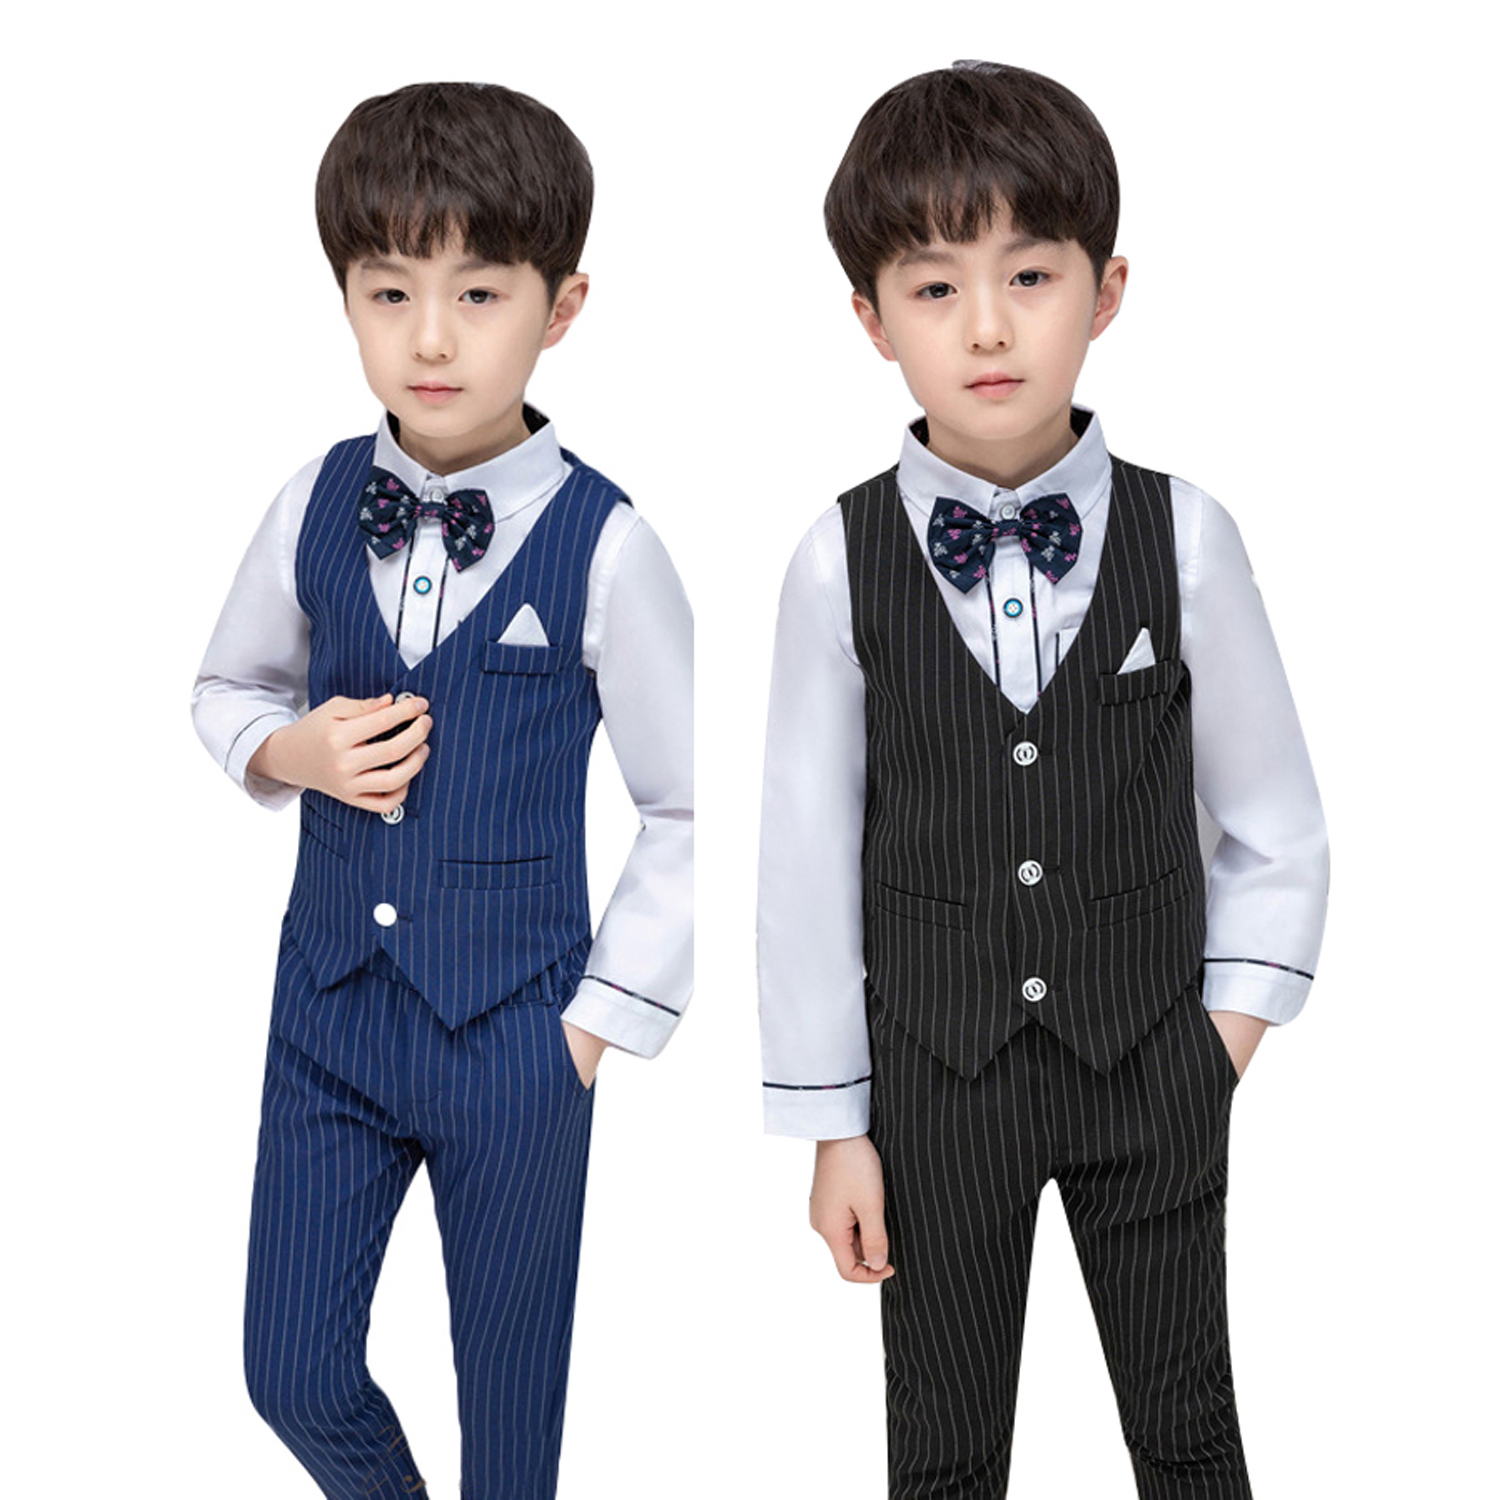 Boys Summer Tuxedo Suits Waistcoat Shirt Trousers Bow Tie 4 Pieces Set 2-14 Years 